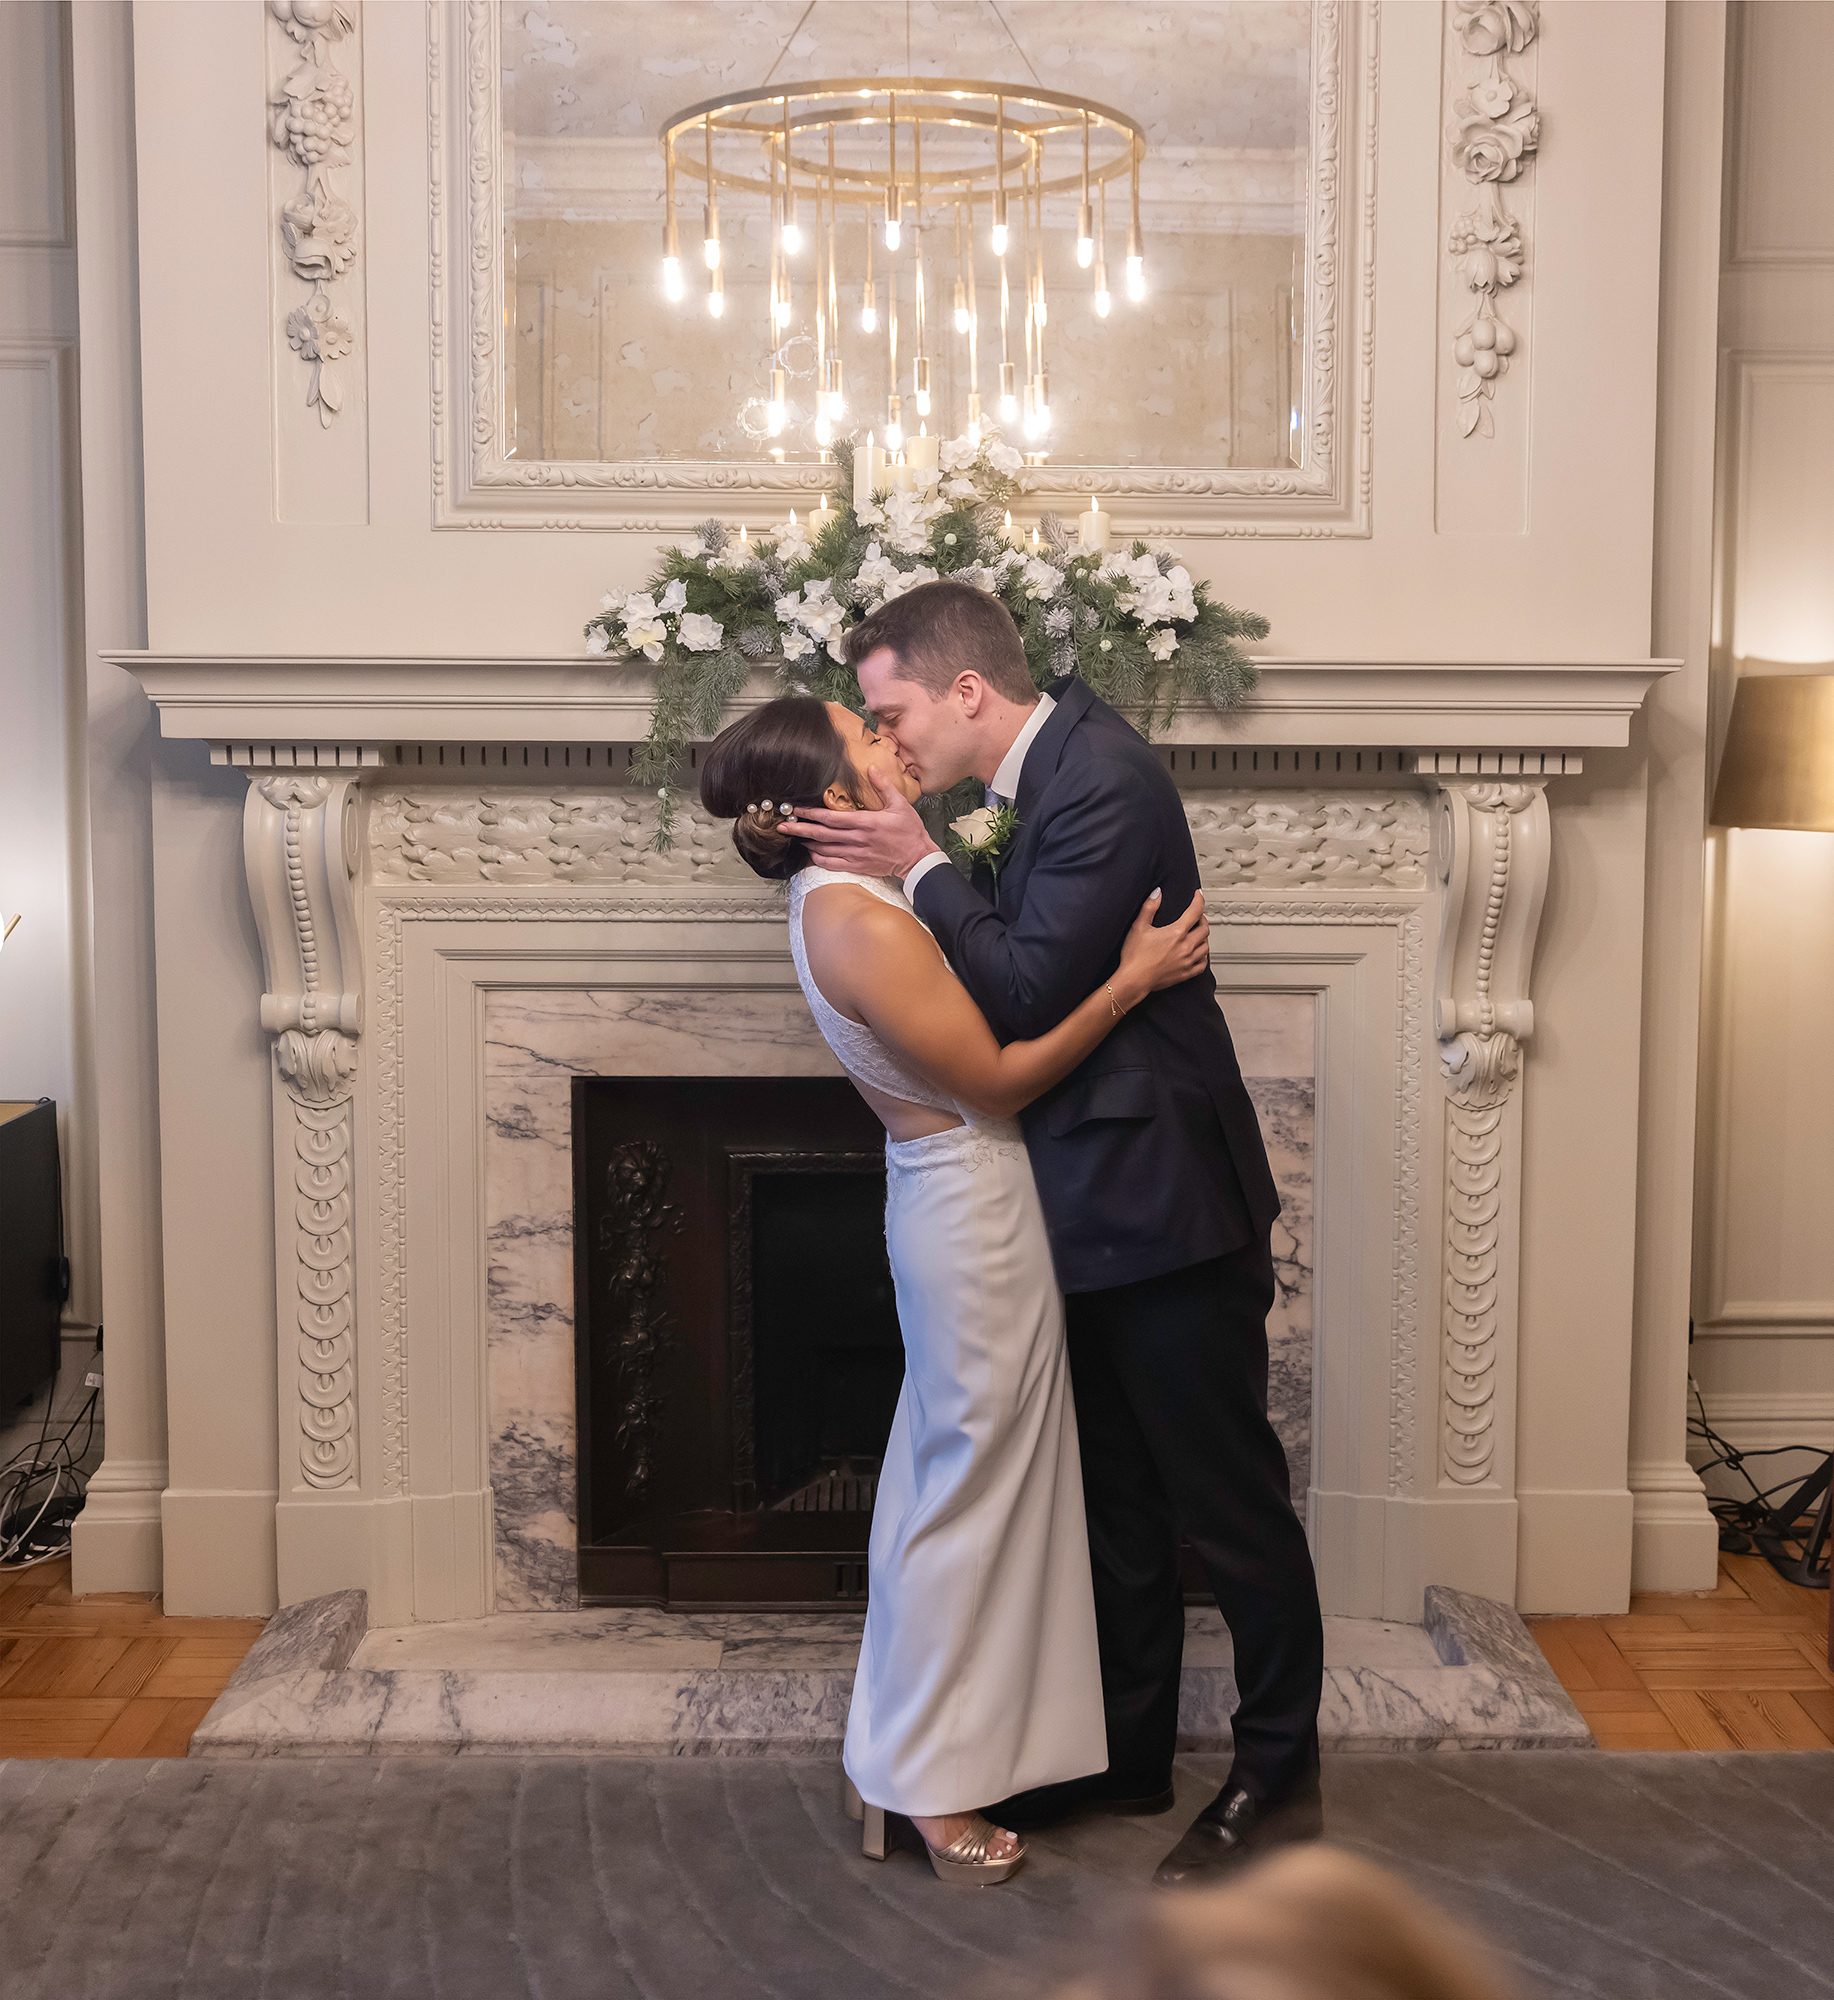 First kiss at Old Marylebone Town Hall wedding ceremony